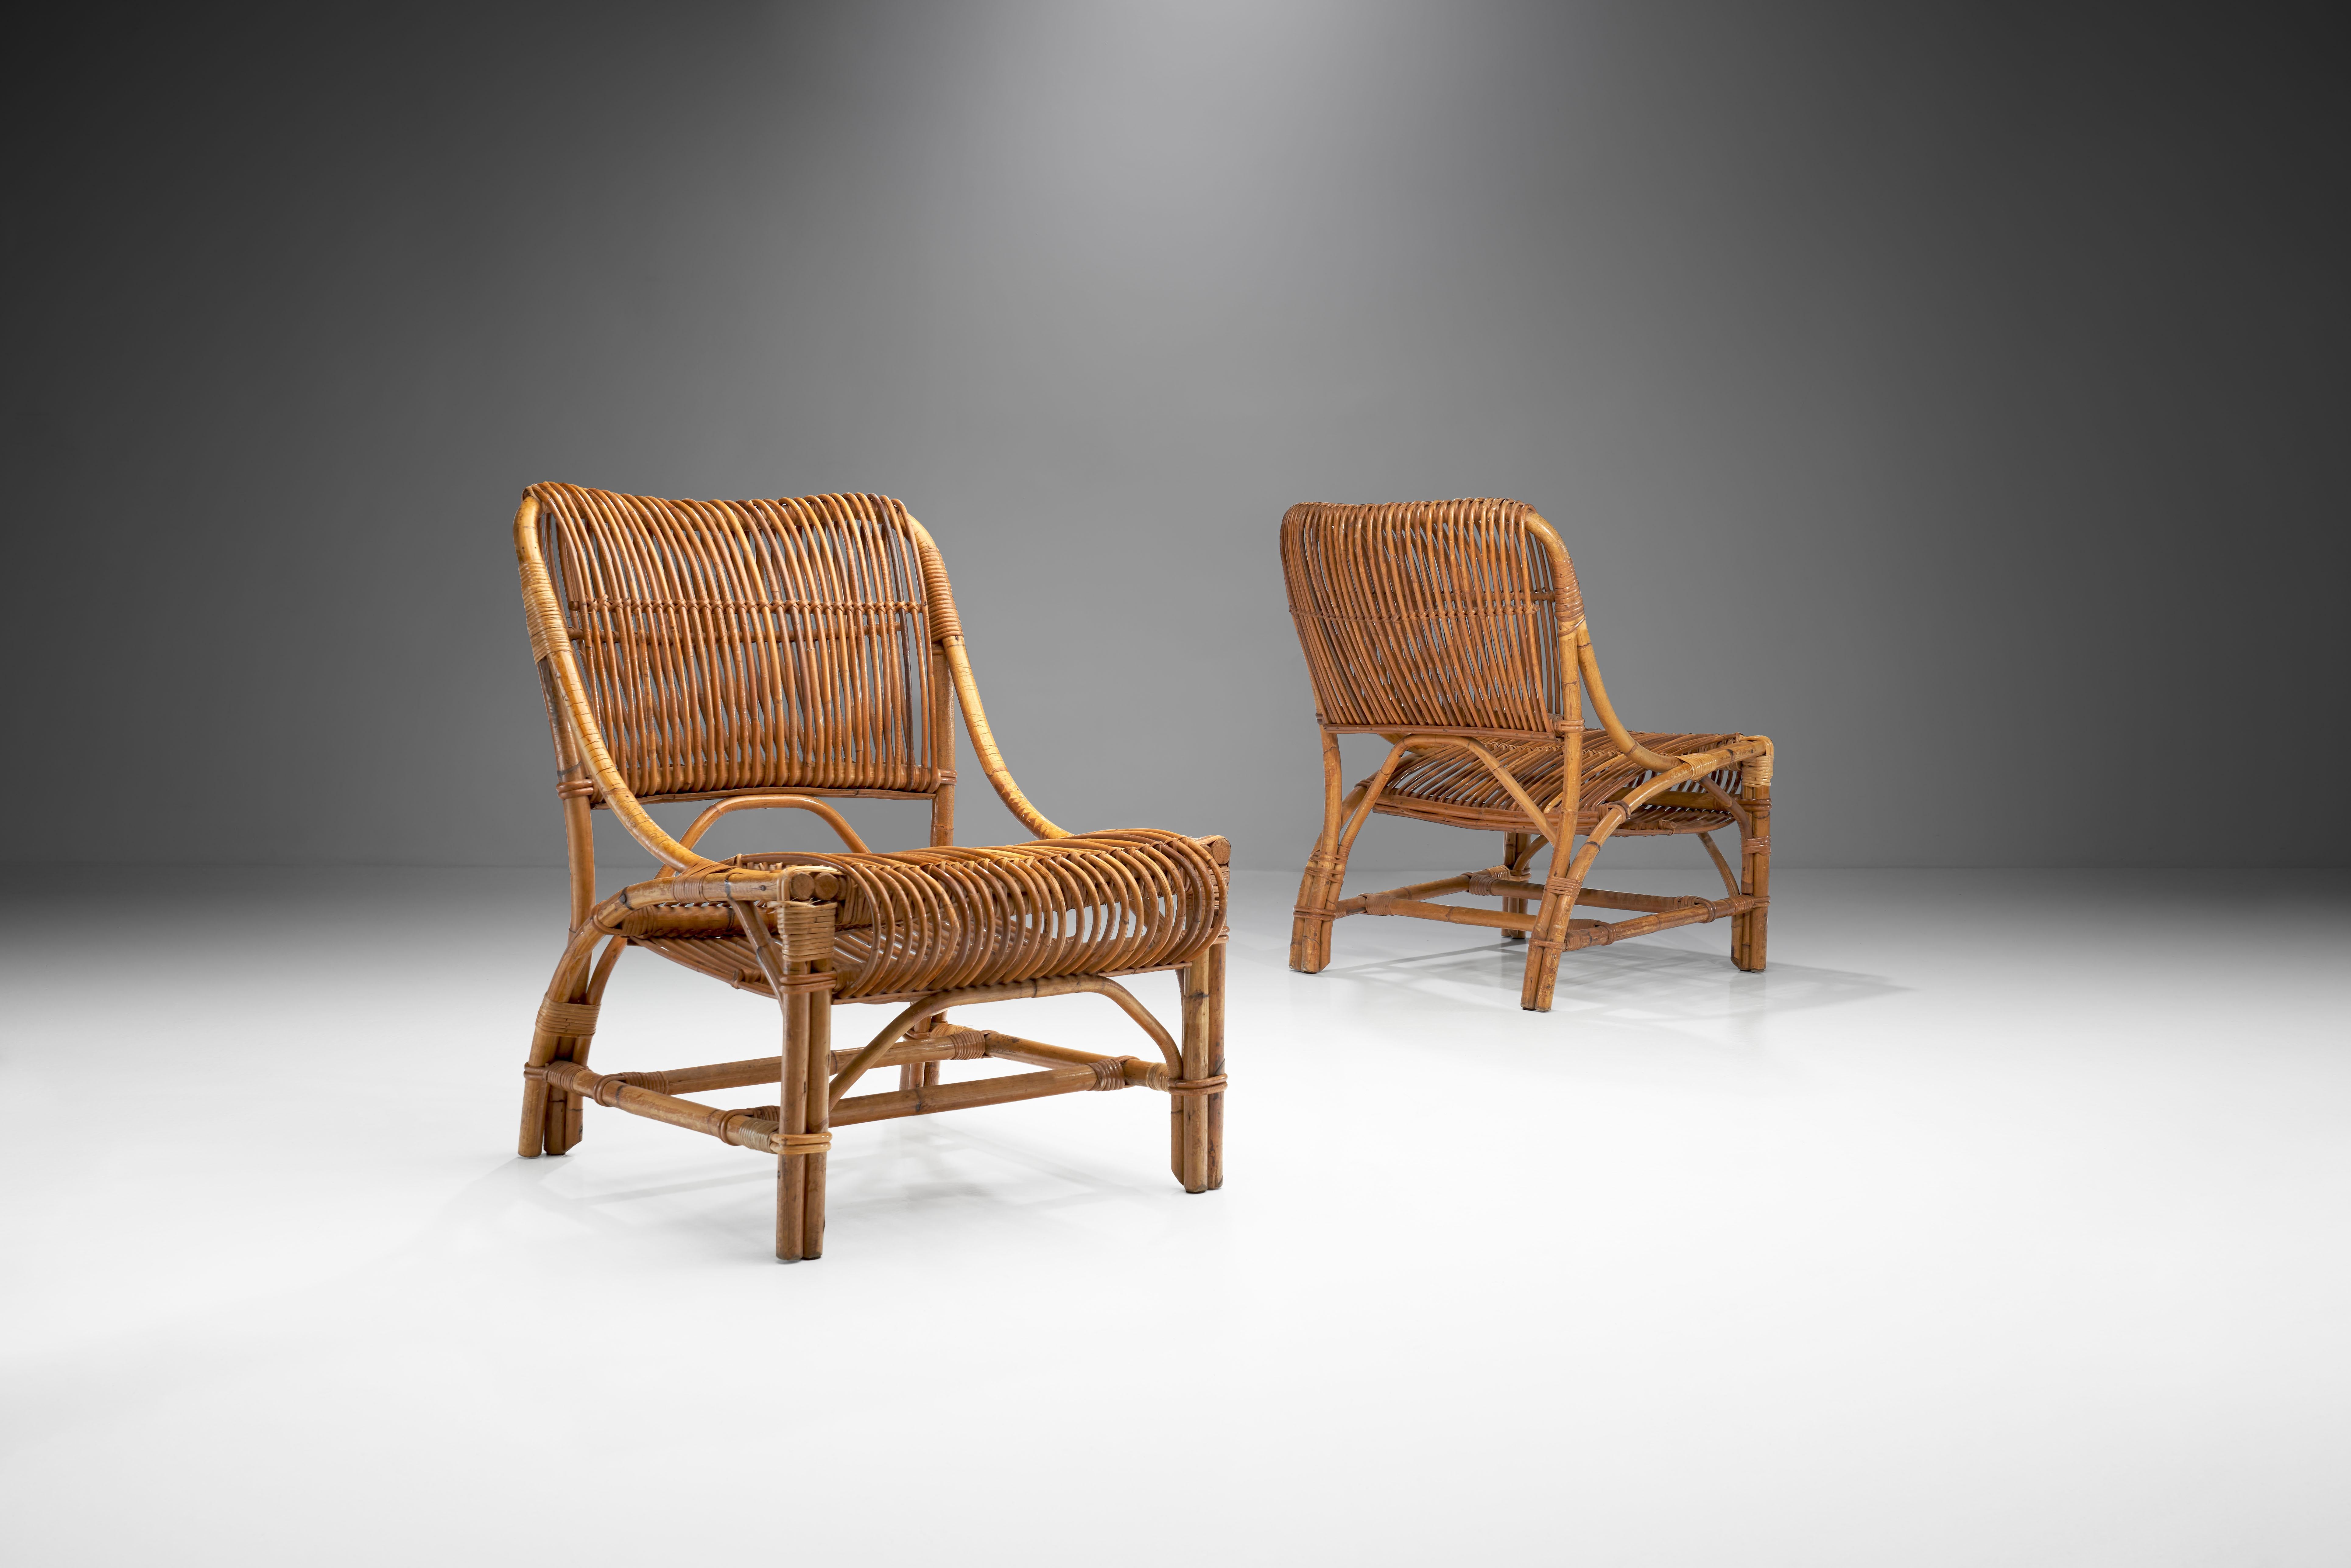 This pair of woven wicker chairs were designed by Vittorio Bonacina from the family-run Bonacina atelier, one of the handful of the surviving rattan ateliers in Europe. Bonacina has been weaving furniture according to the old, traditional techniques